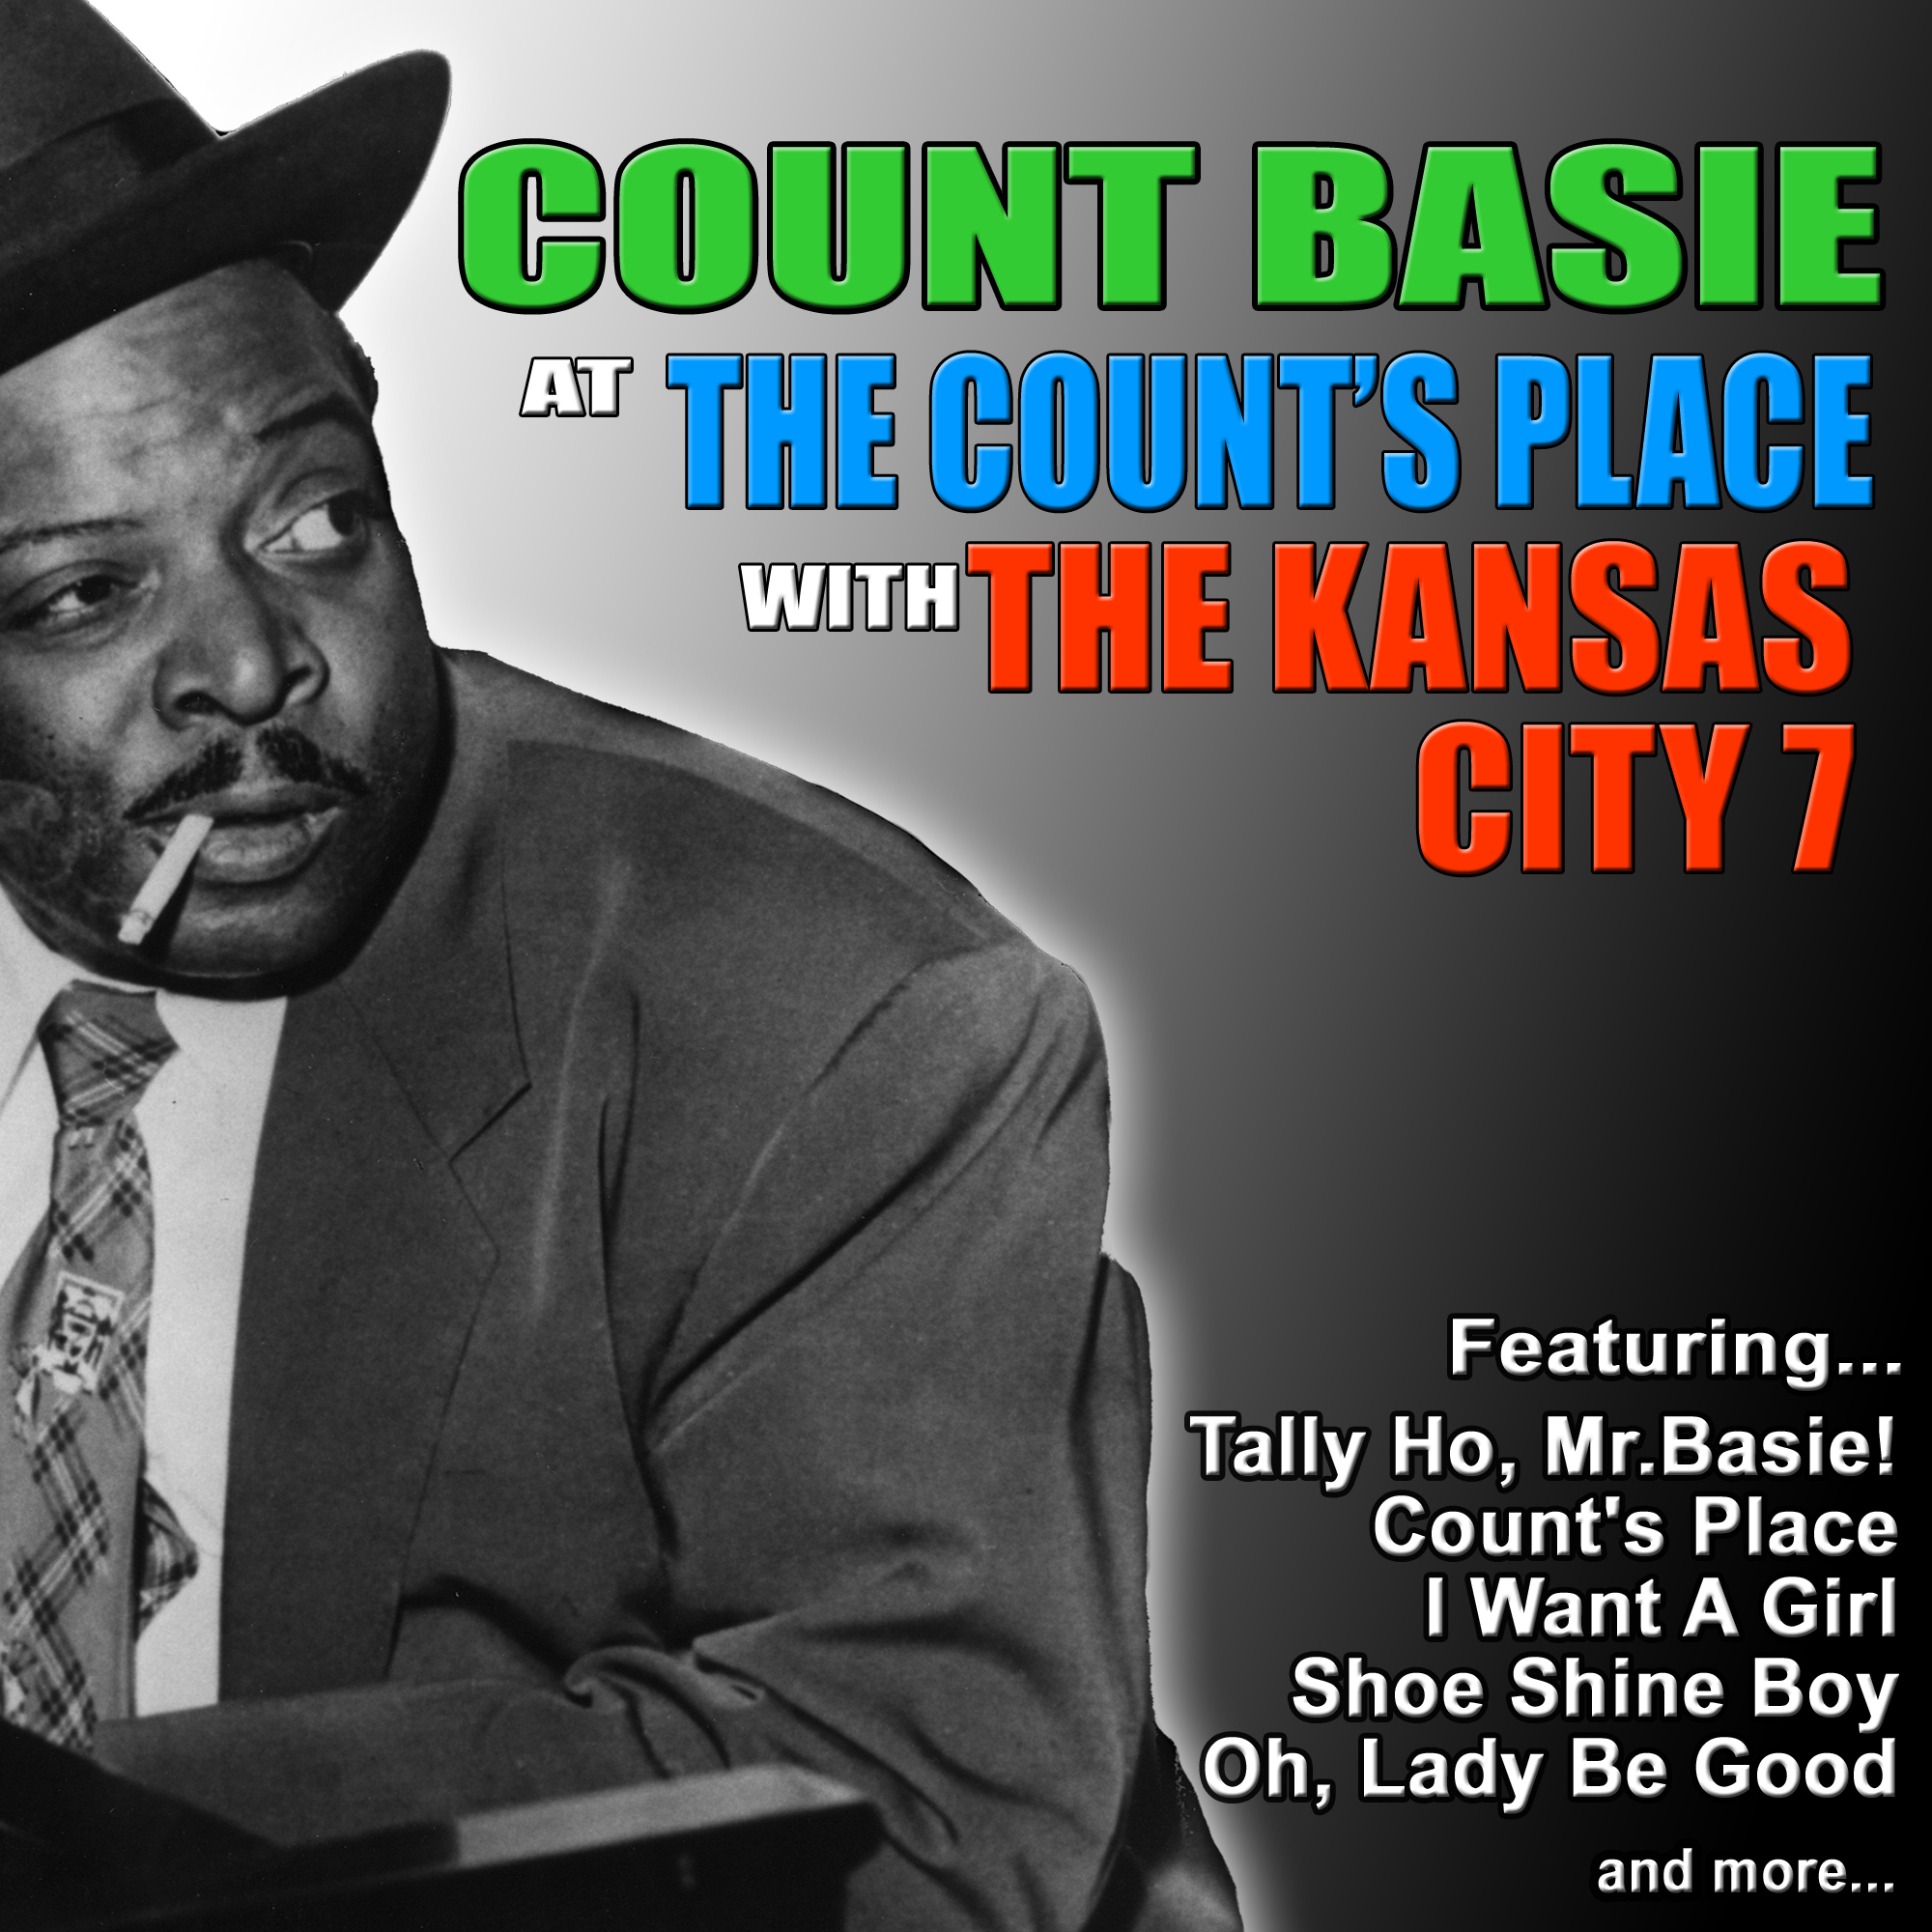 Count Basie at the Counts Place With the Kansas City 7